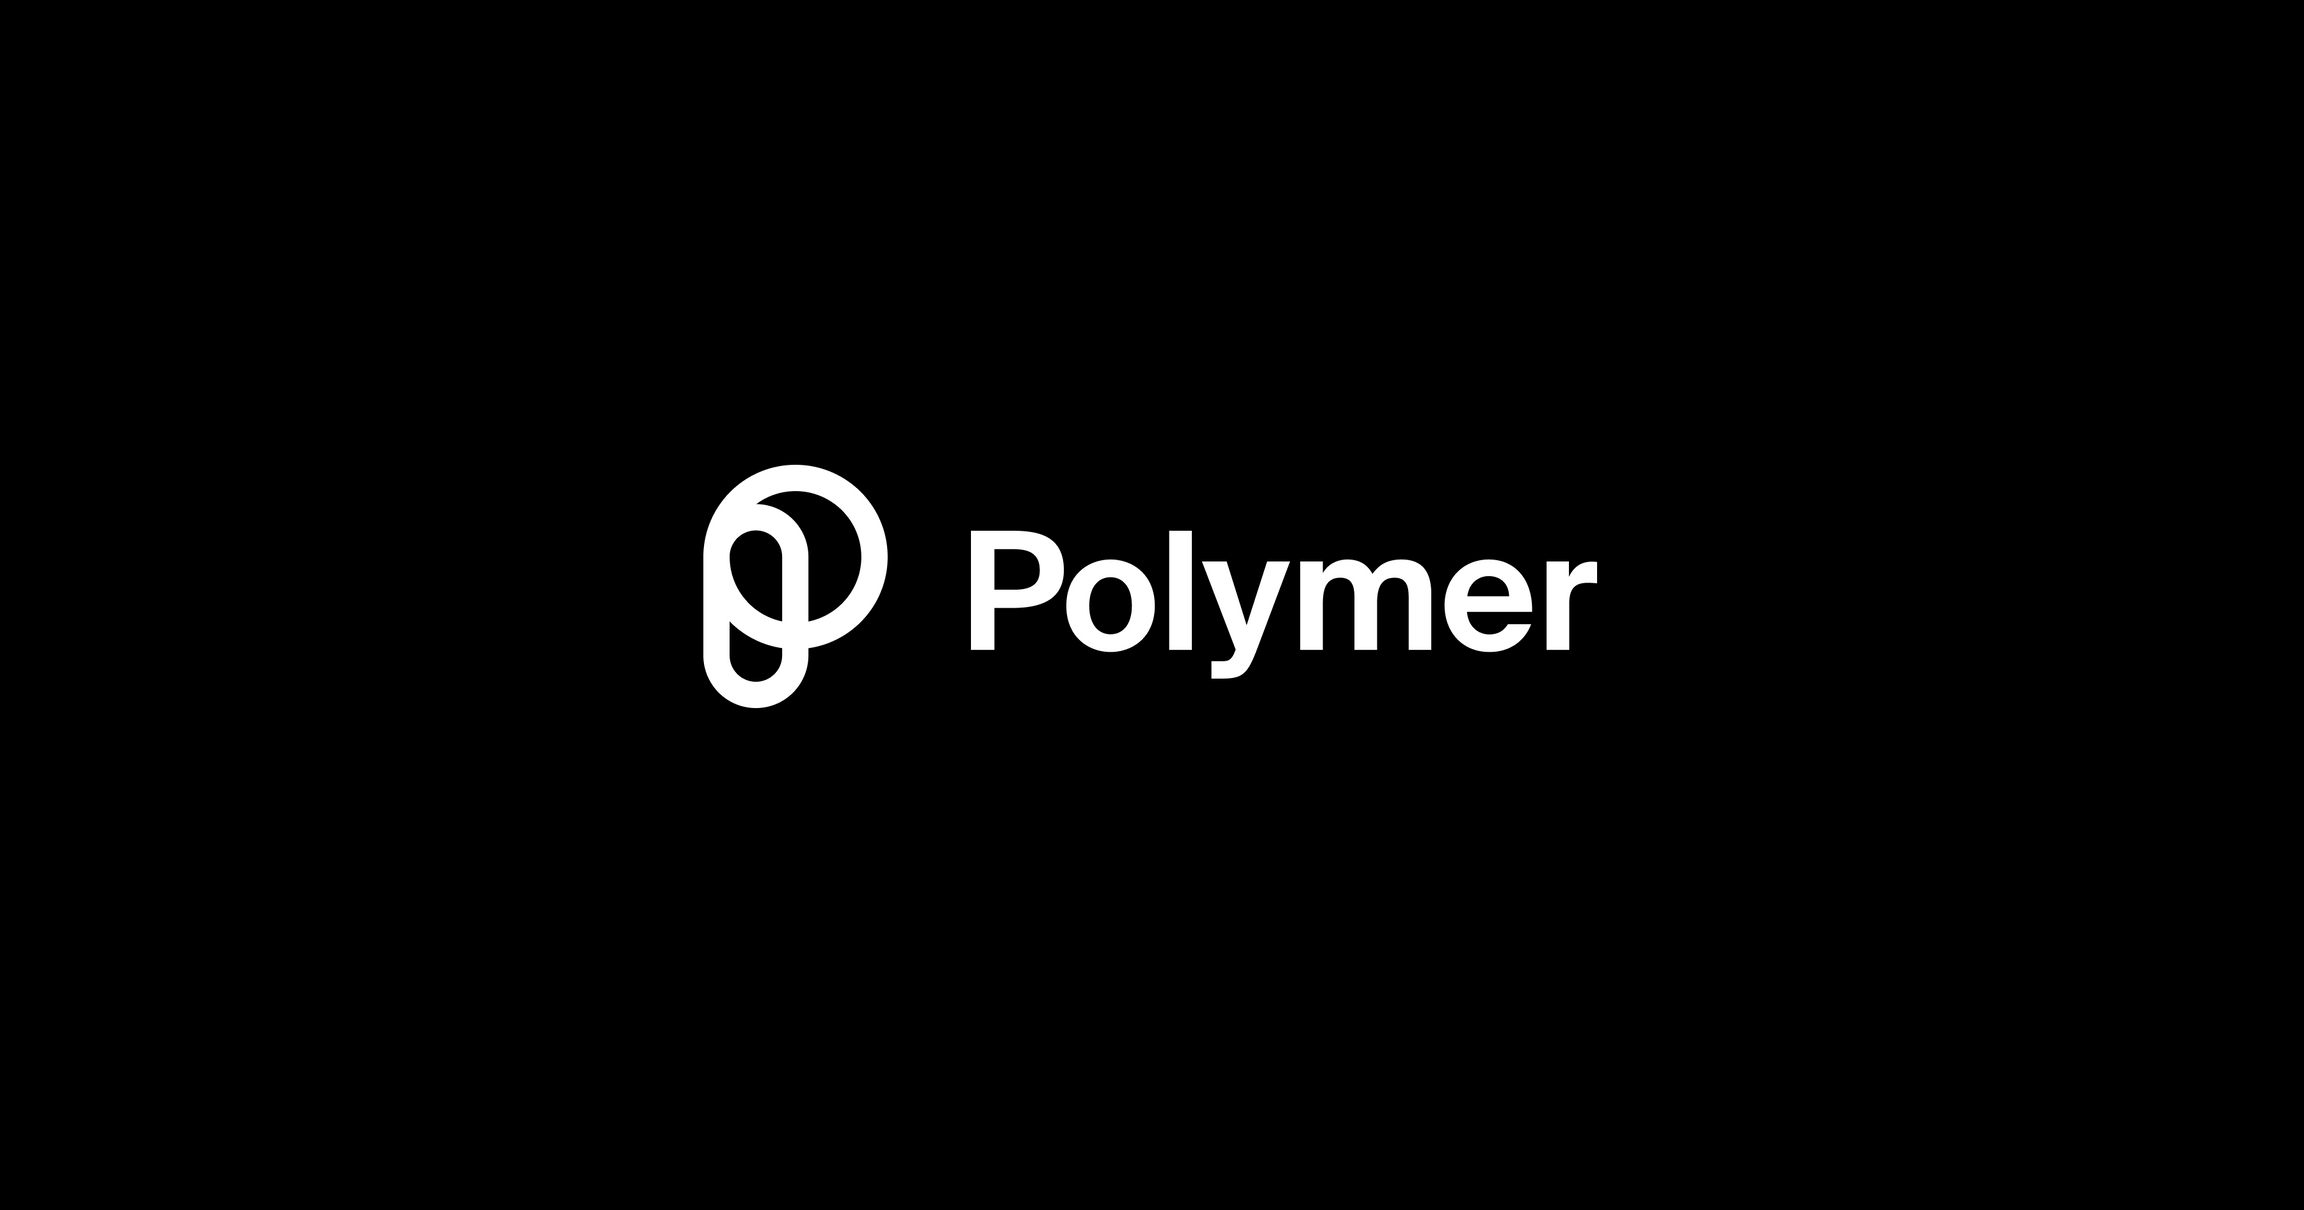 The Polymer logo, displayed in white on a solid black background.